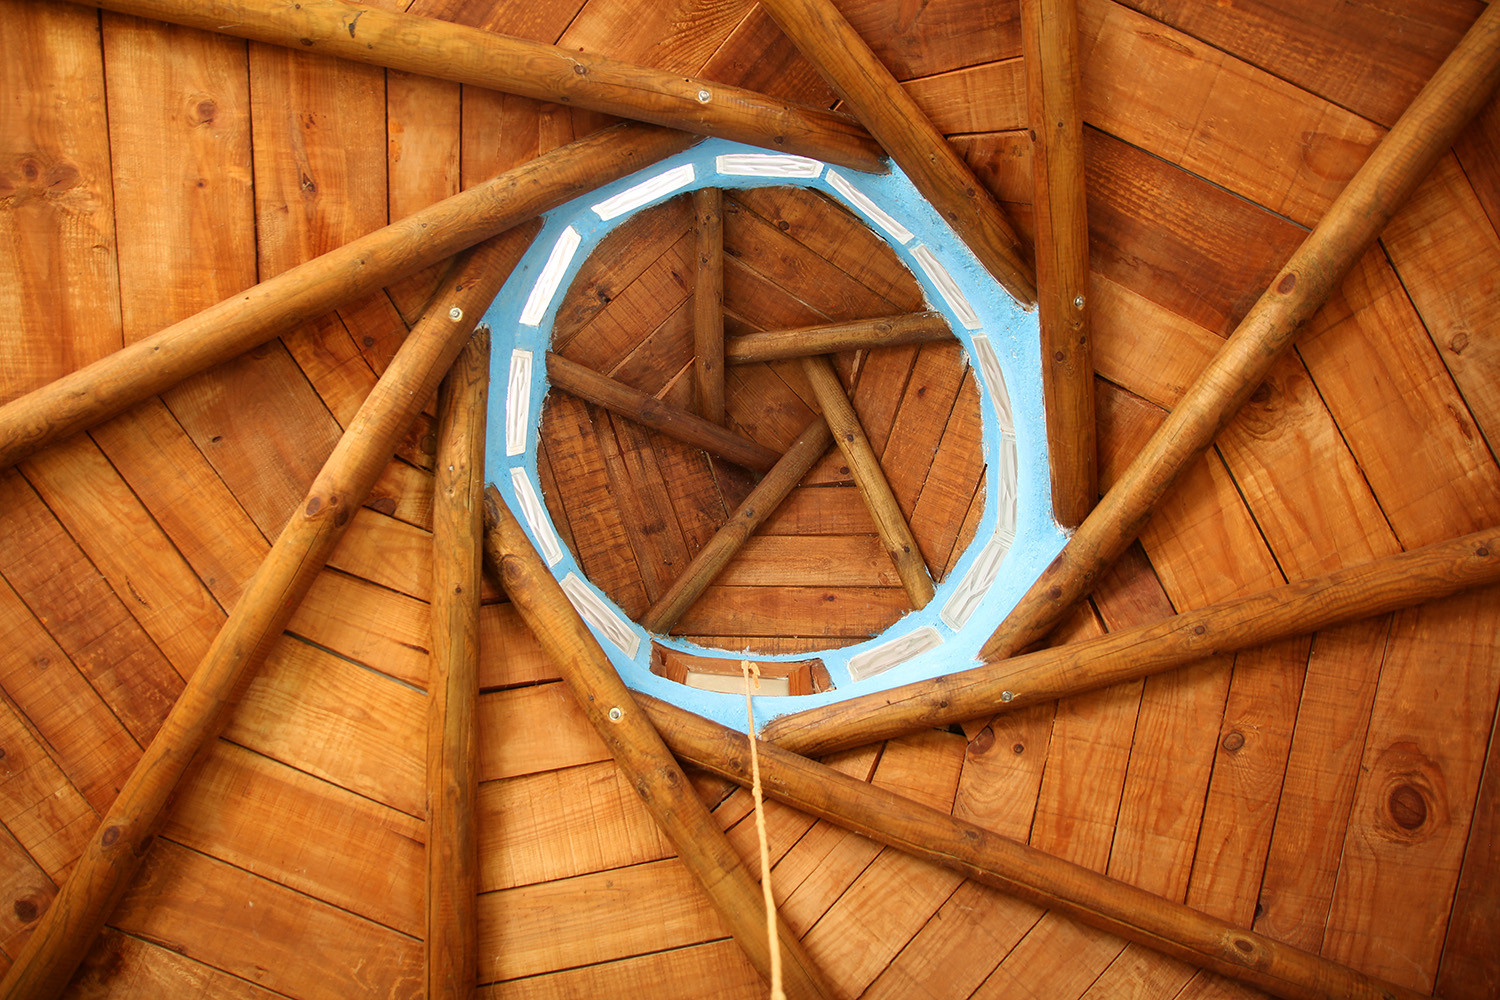 The ceiling of the cabin